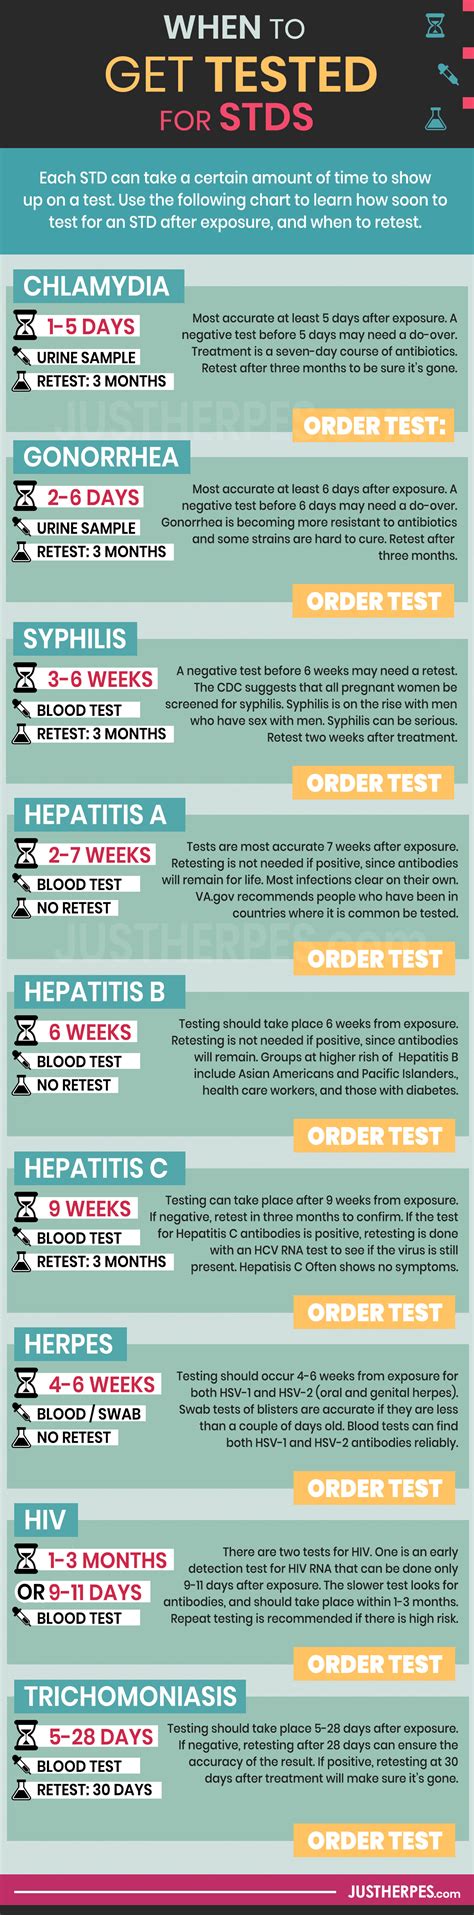 when to get tested for stds how soon after exposure and how often